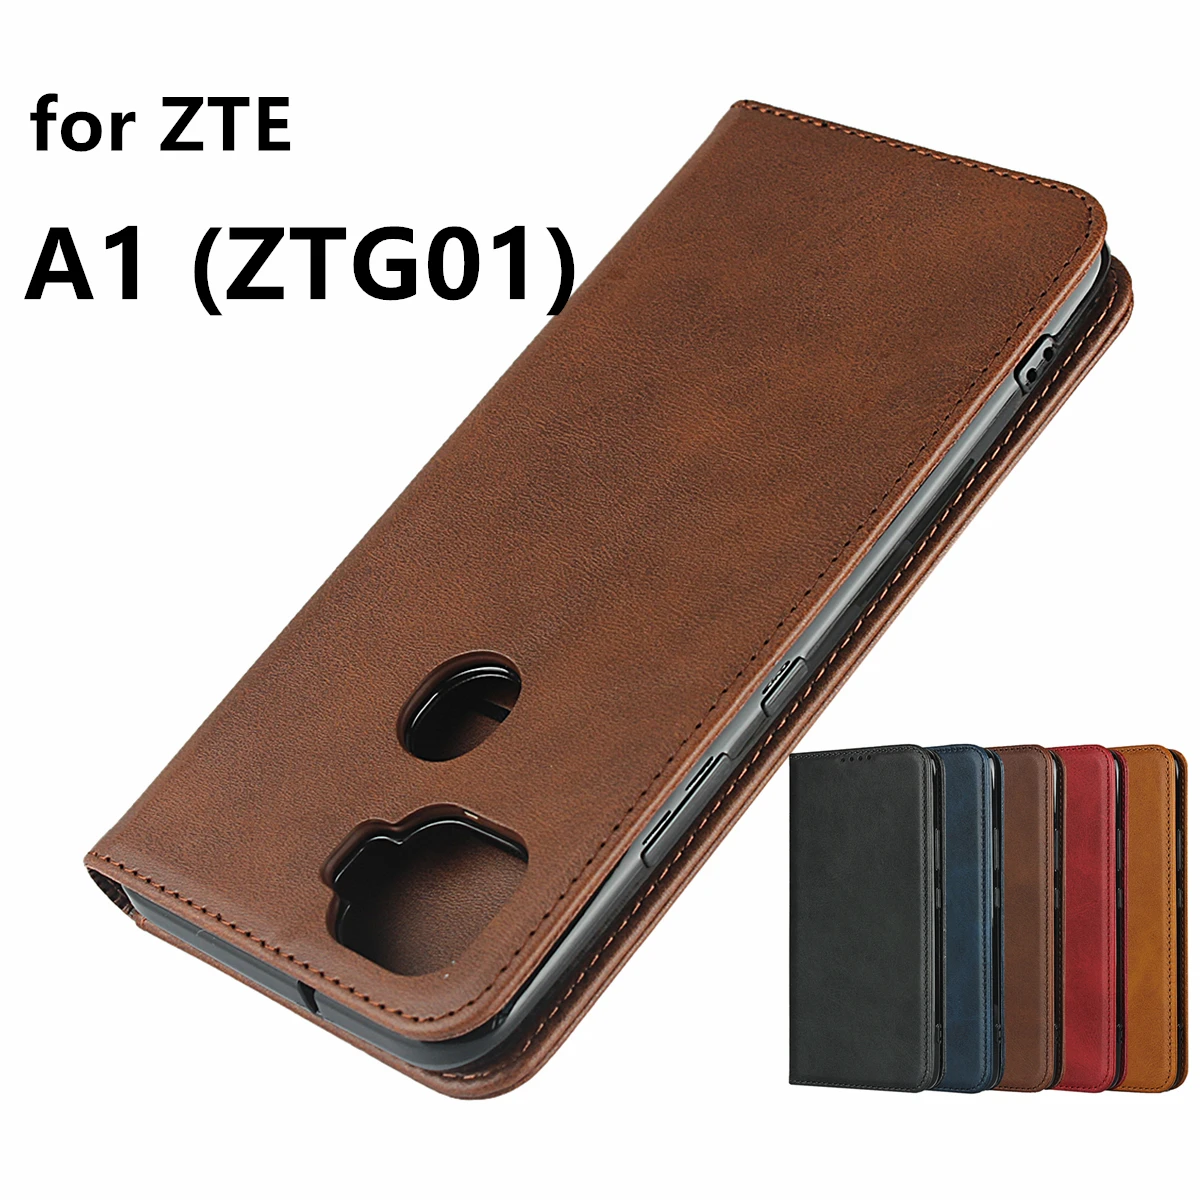 

Leather case for ZTE A1 ZTG01 Flip case card holder Holster Magnetic attraction Cover Case Wallet Case